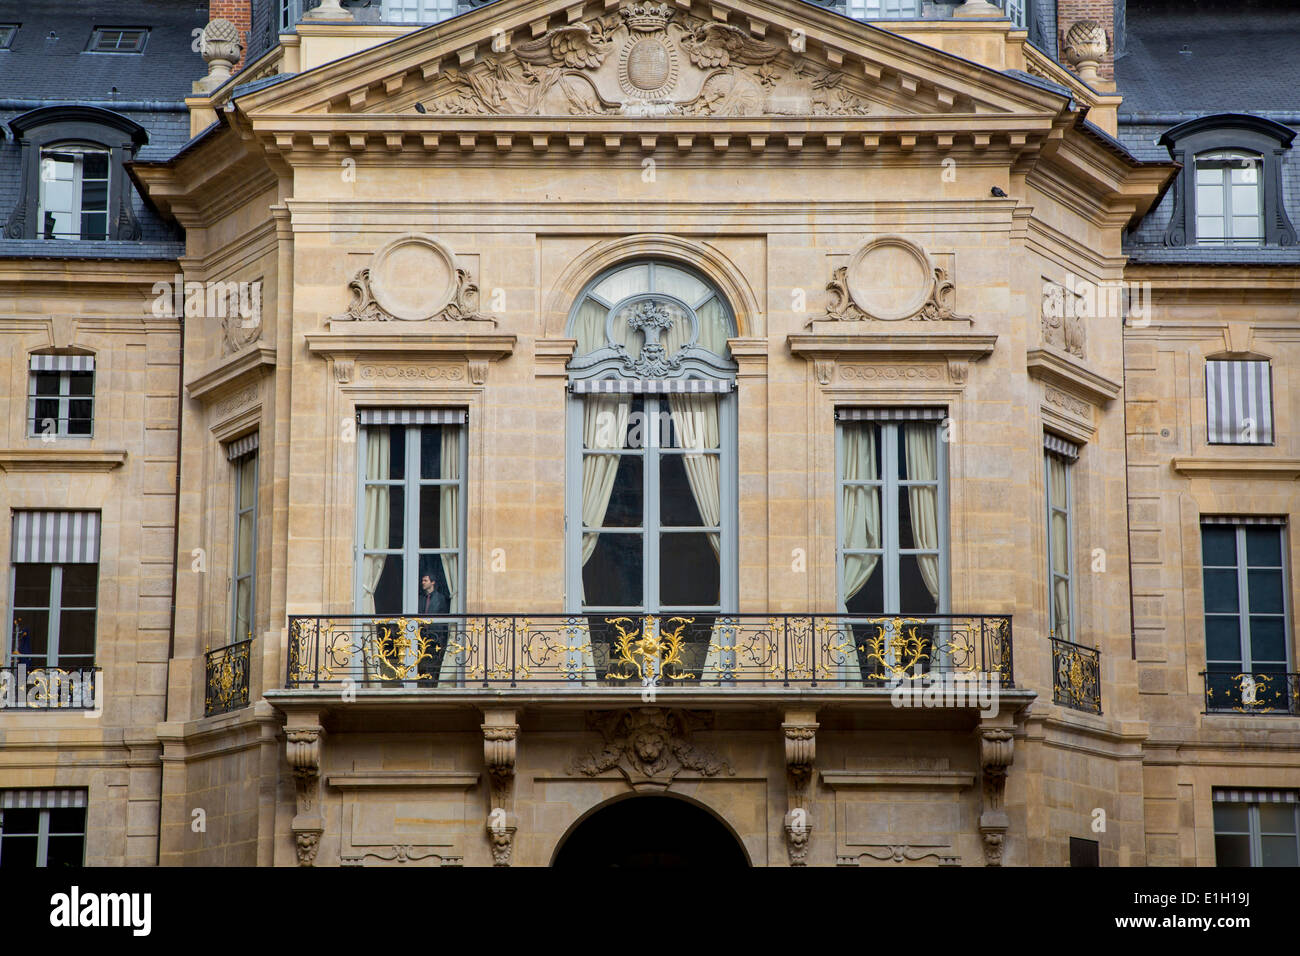 Man looking out a window of Ministry of Culture and Communication building attached to Palais Royal, Paris France Stock Photo